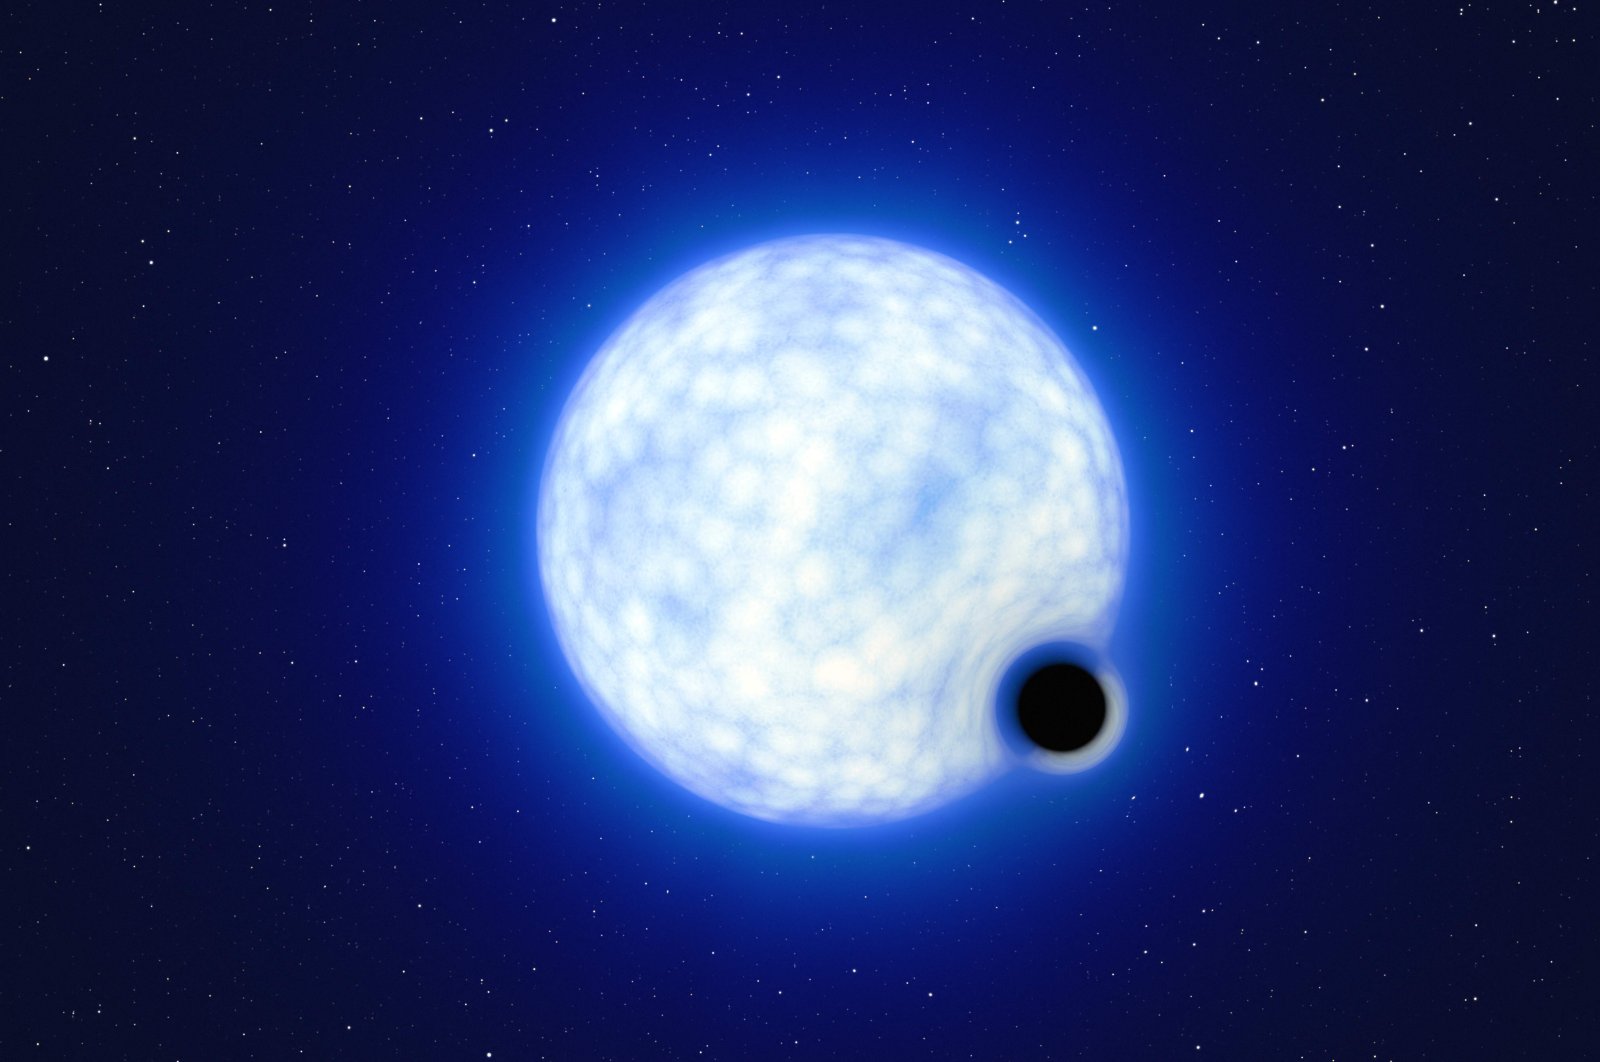 This handout artist’s impression released by The European Southern Observatory (ESO) shows the binary system VFTS 243 composed of a blue star with 25 times the sun’s mass and a black hole. (Photo by European Southern Observatory via AFP)